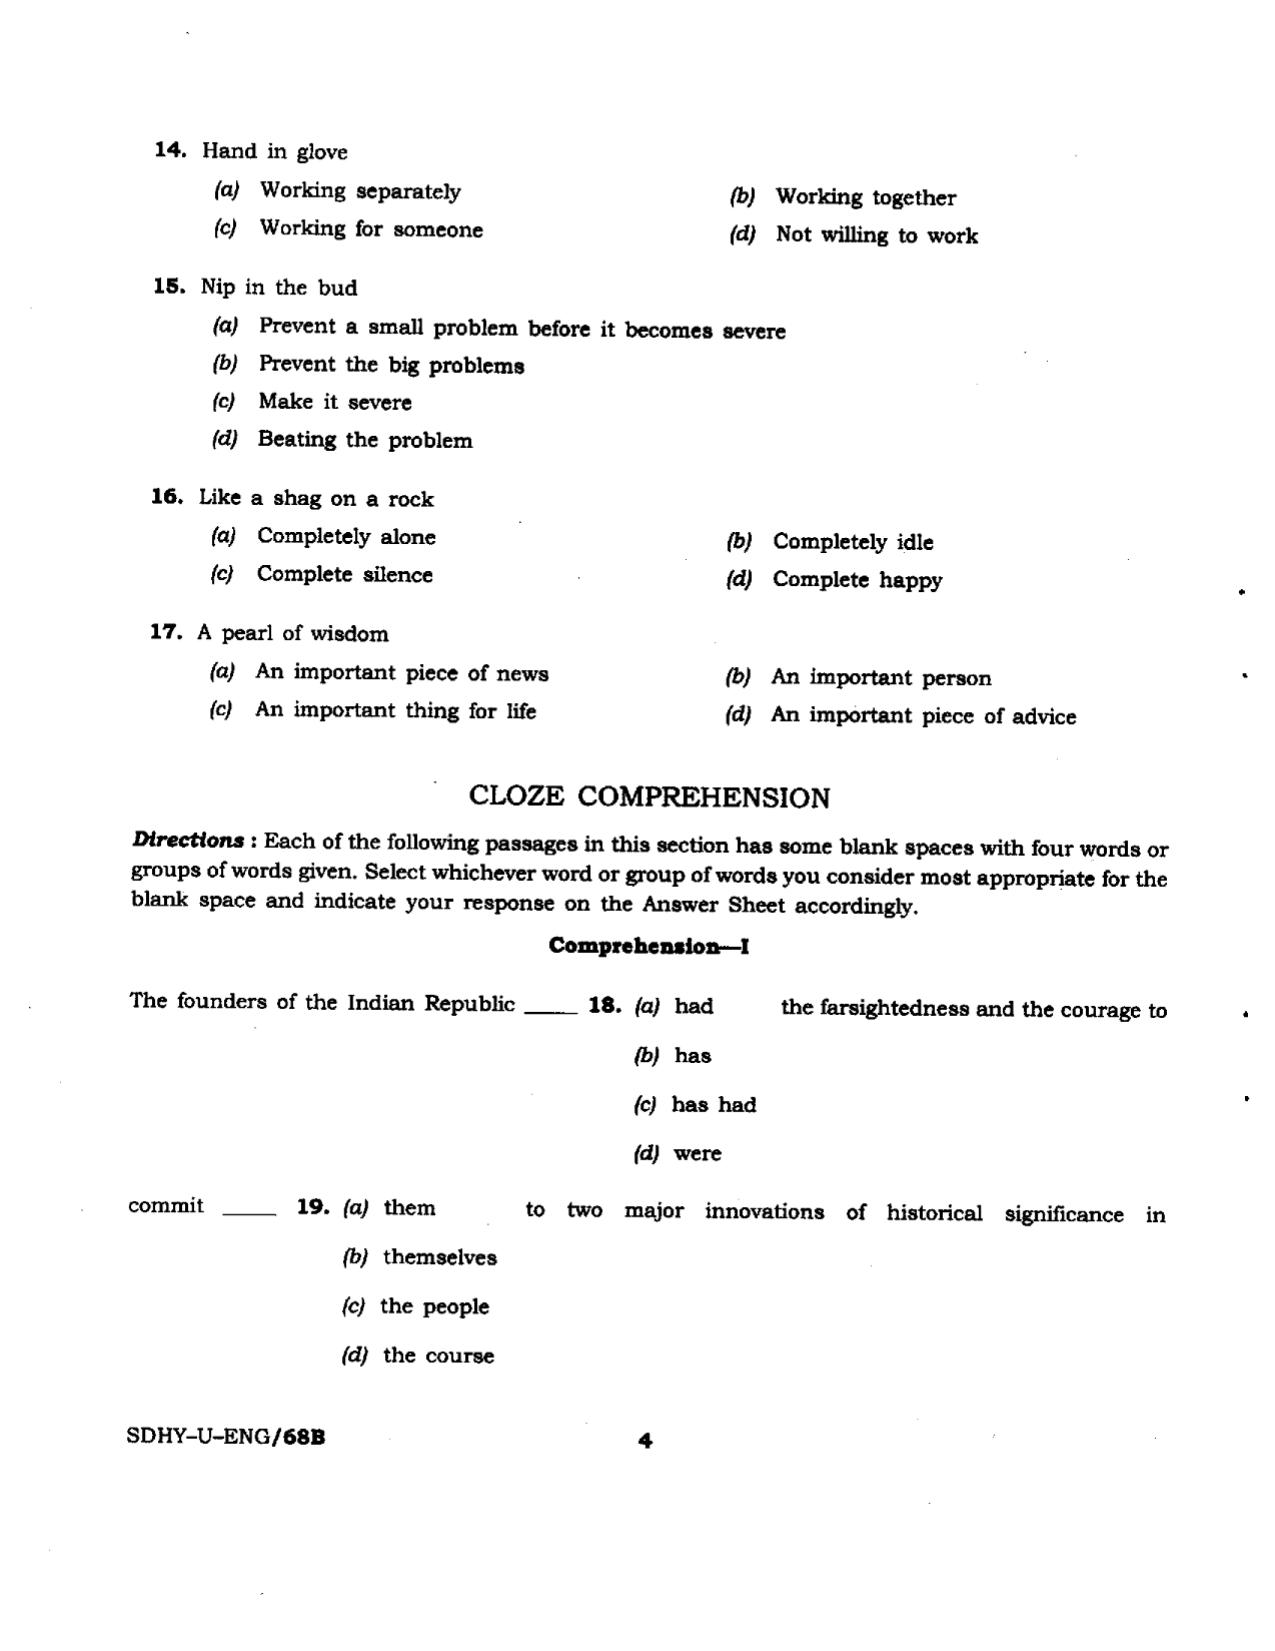 PSPCL General English Model Question Paper - Page 4